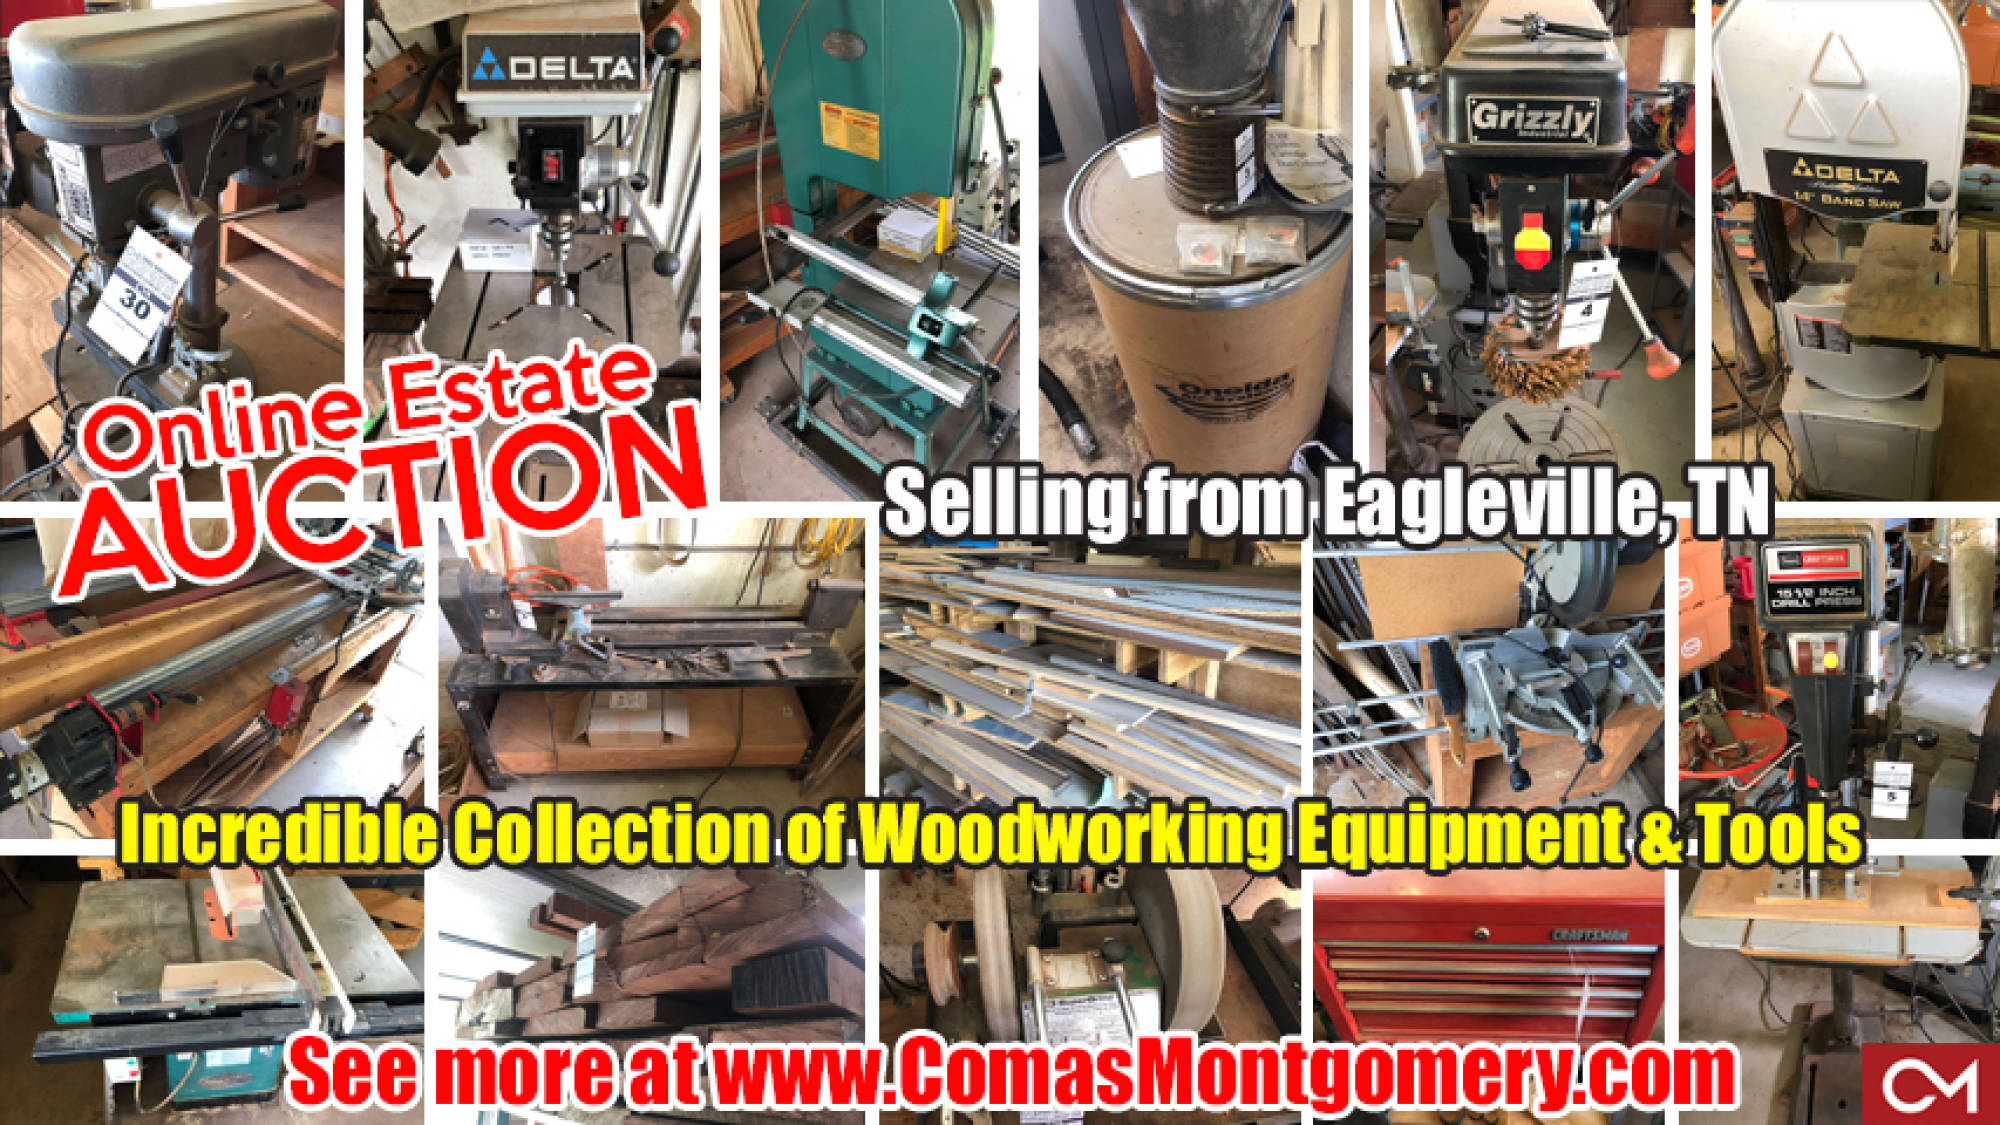 Woodworking, Tools, Equipment, For Sale, Lathes, Grinders, Hand Tools, Auction, Estate, Sale, Comas, Montgomery, Eagleville, Tennessee, Lynch, Legacy, Grizzly, Oneida, Delta, Rockwell, Dayton, Wilton, Tormek, Wood, Lumber, Craftsman, Craft, Hardware